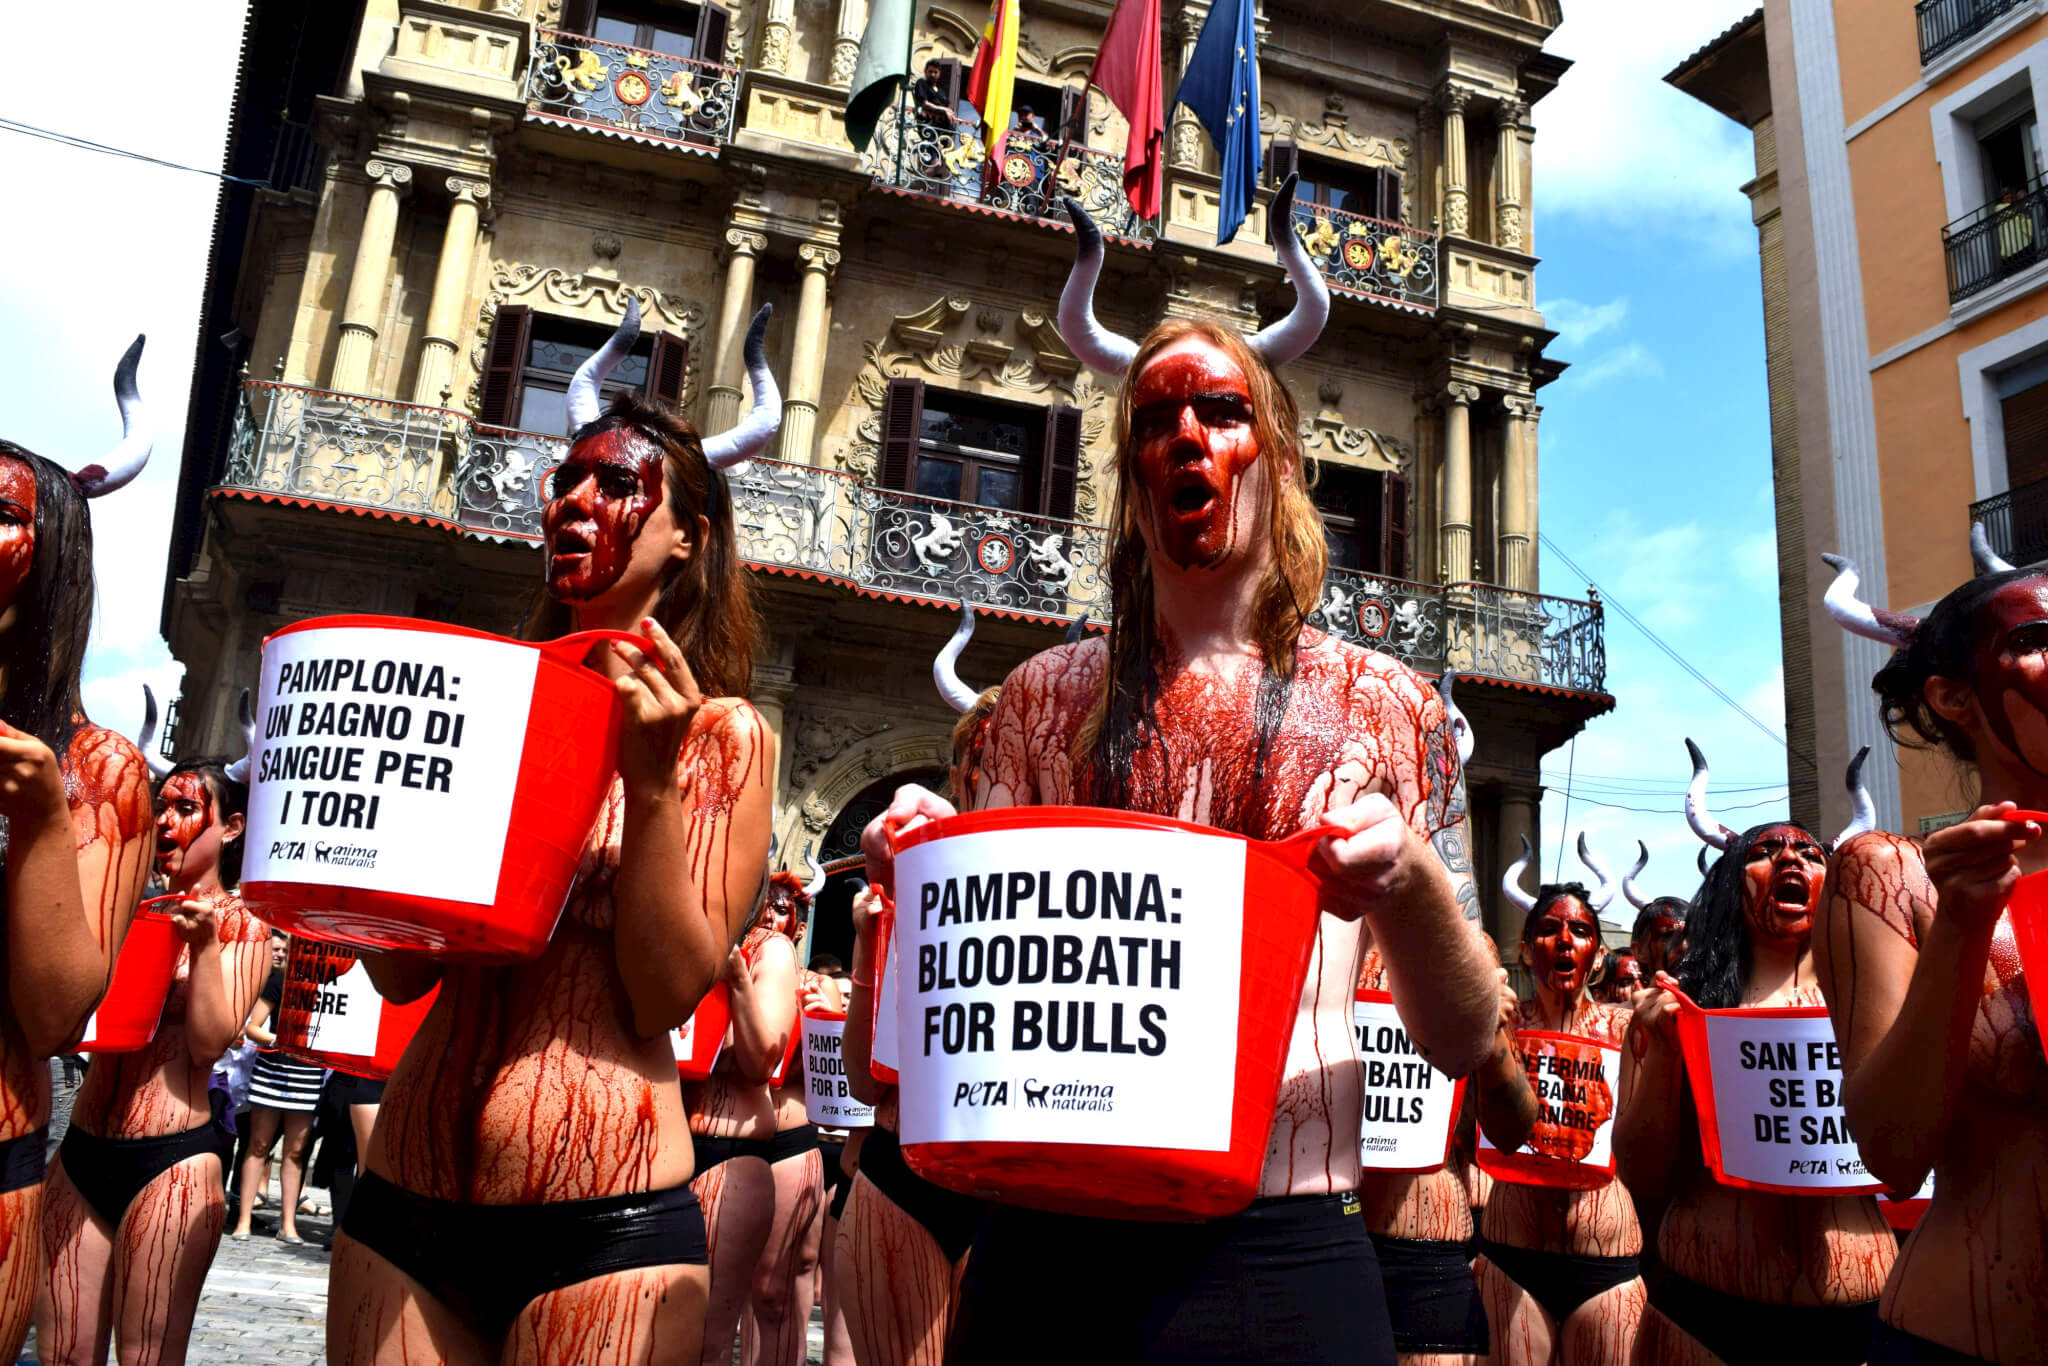 Aussies Join Mass ‘Bloodbath’ to Protest Pamplona’s Running of the Bulls